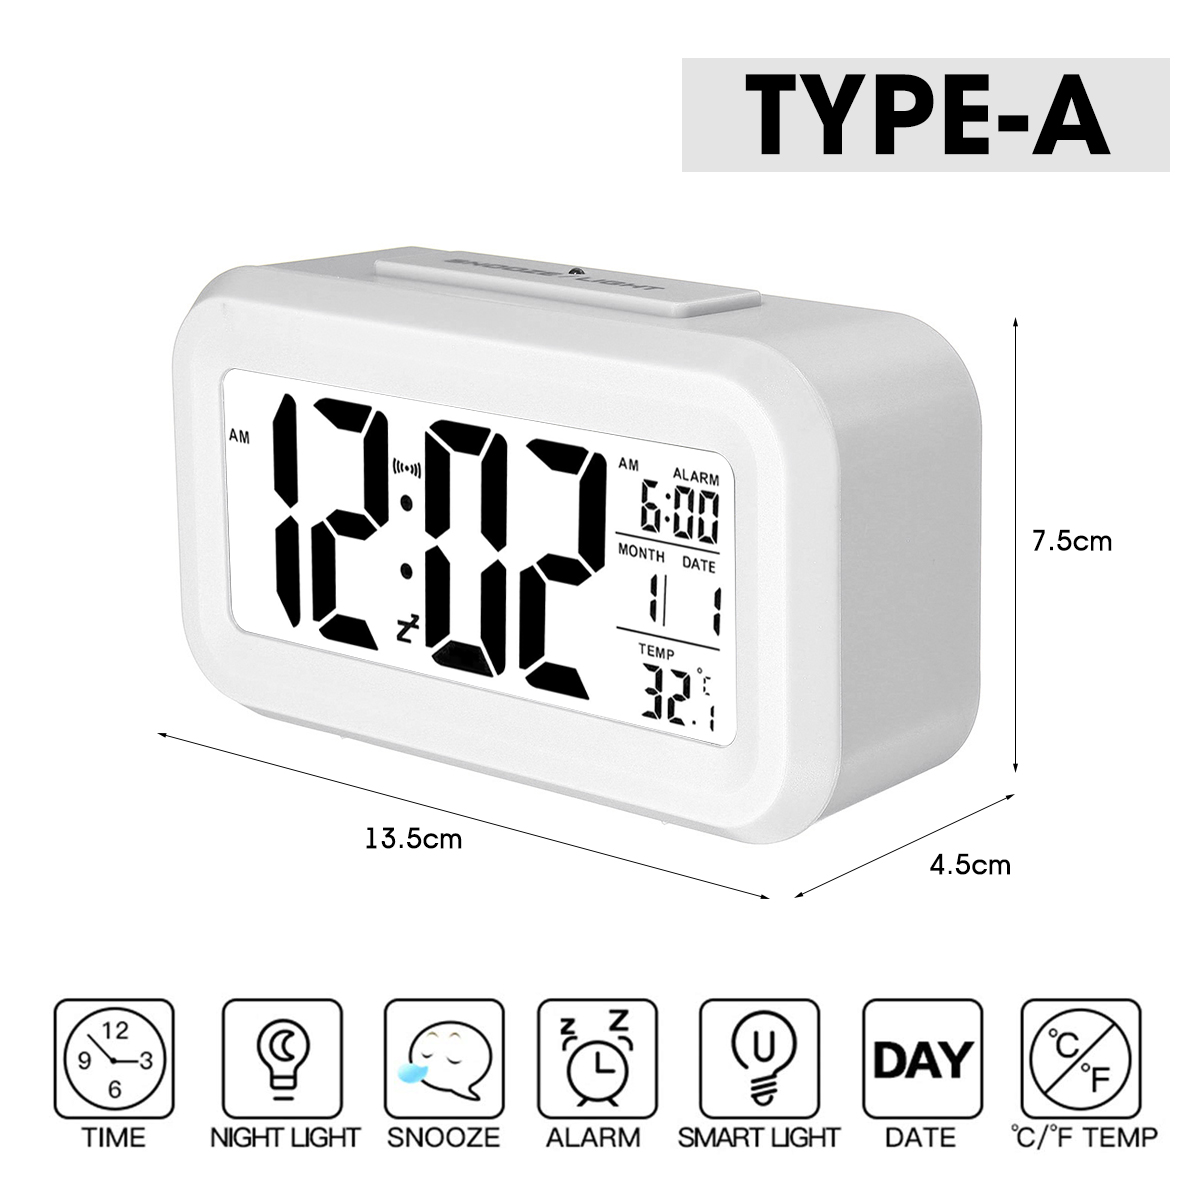 Backlight-LCD-Digital-Alarm-Clock-45quot32quot-Large-Display-Night-Light-with-Calendar-Thermometer-E-1760102-4